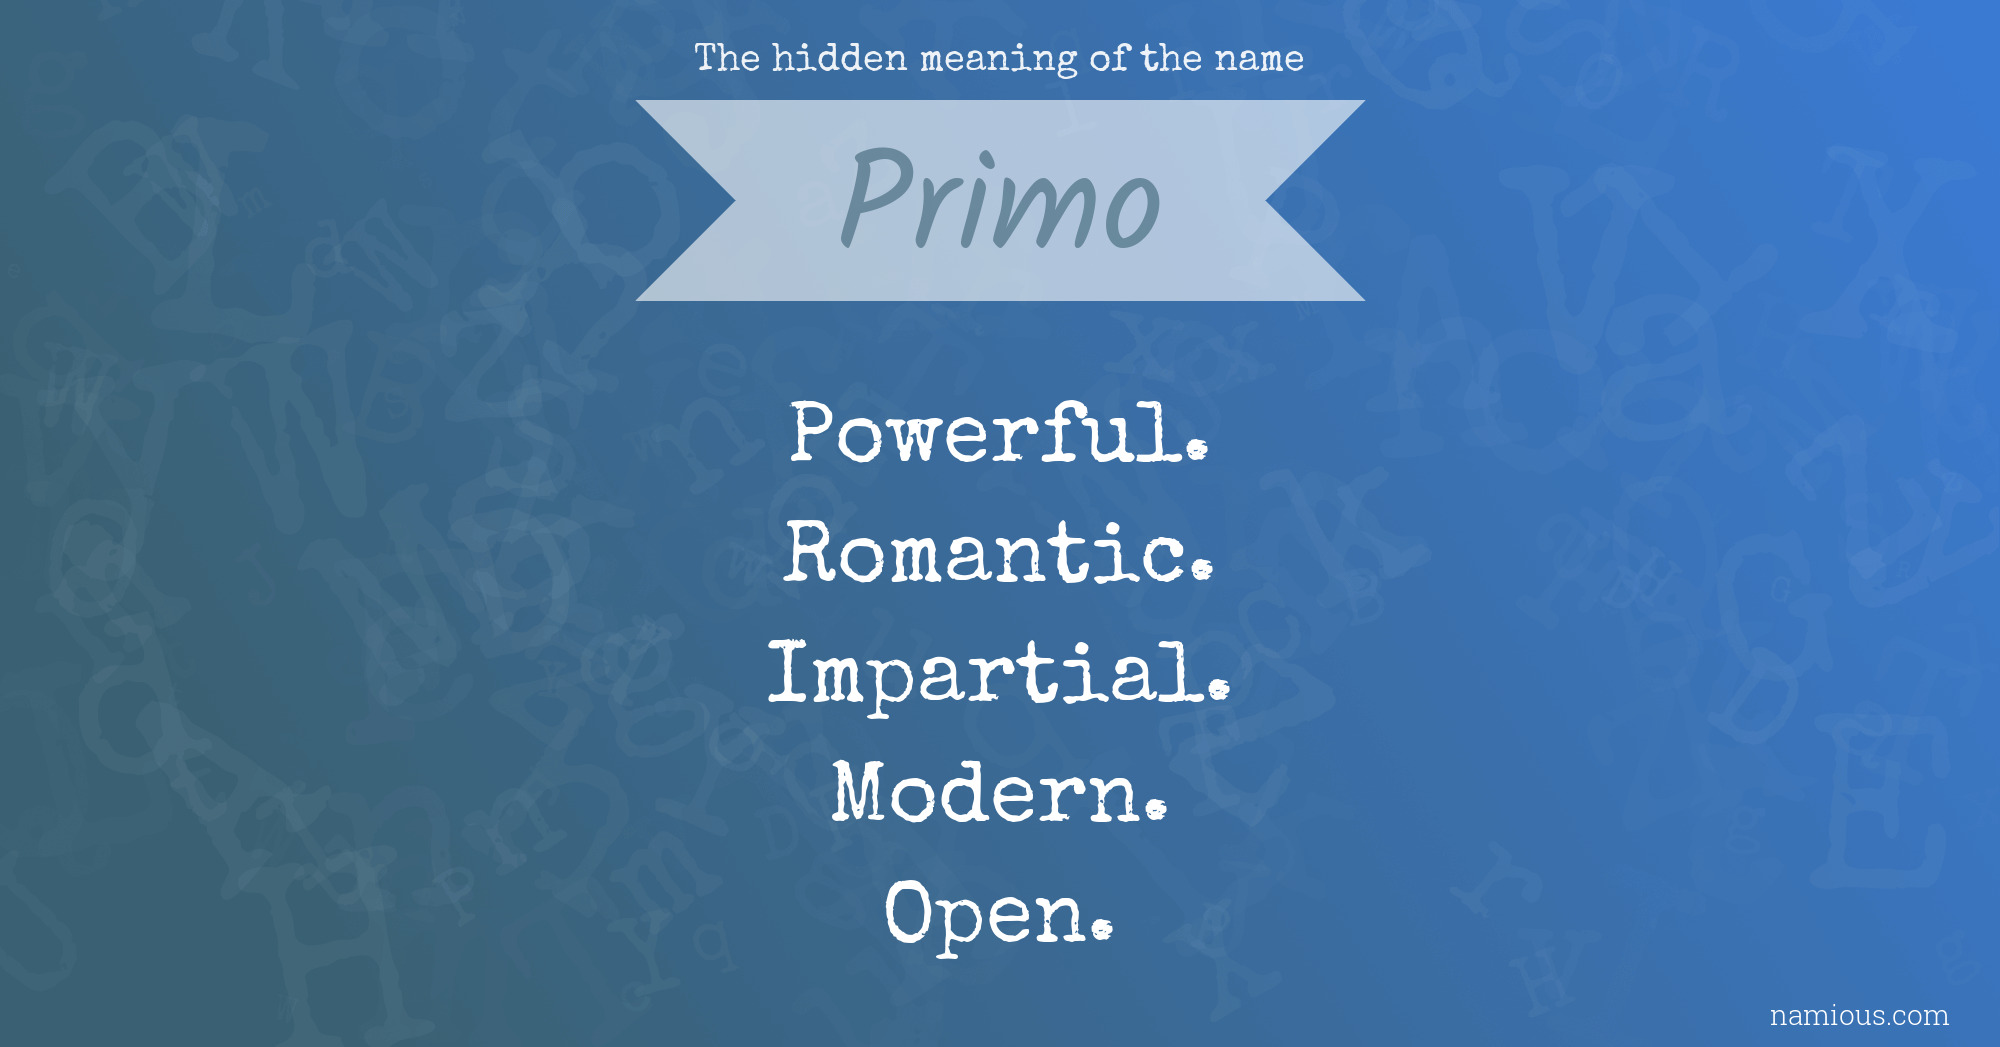 primo trip meaning